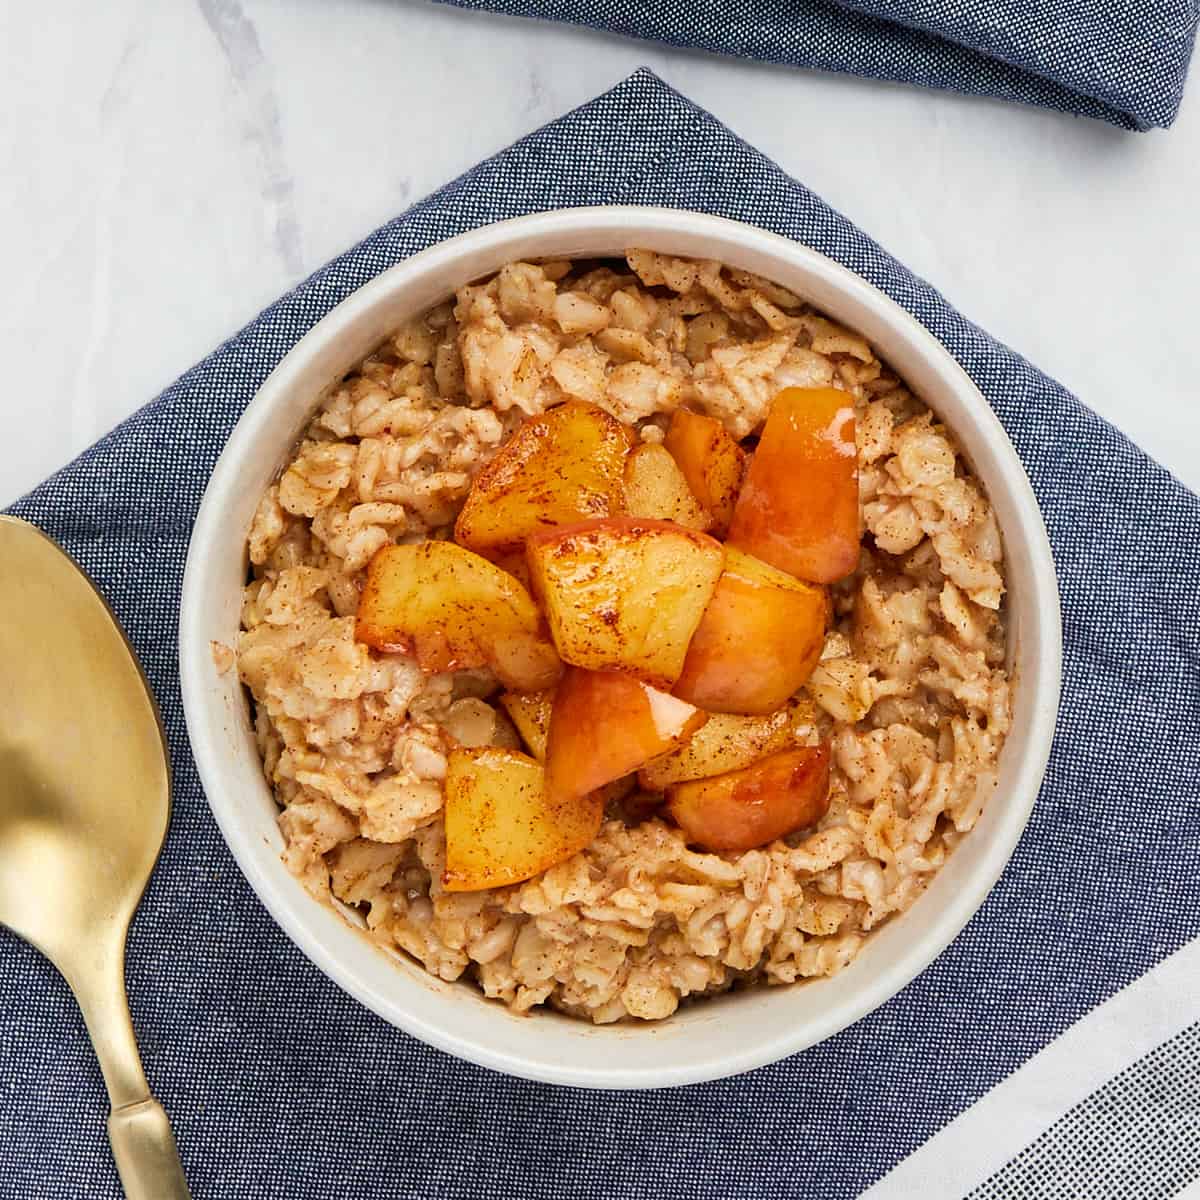 oatmeal topped with cinnamon apples